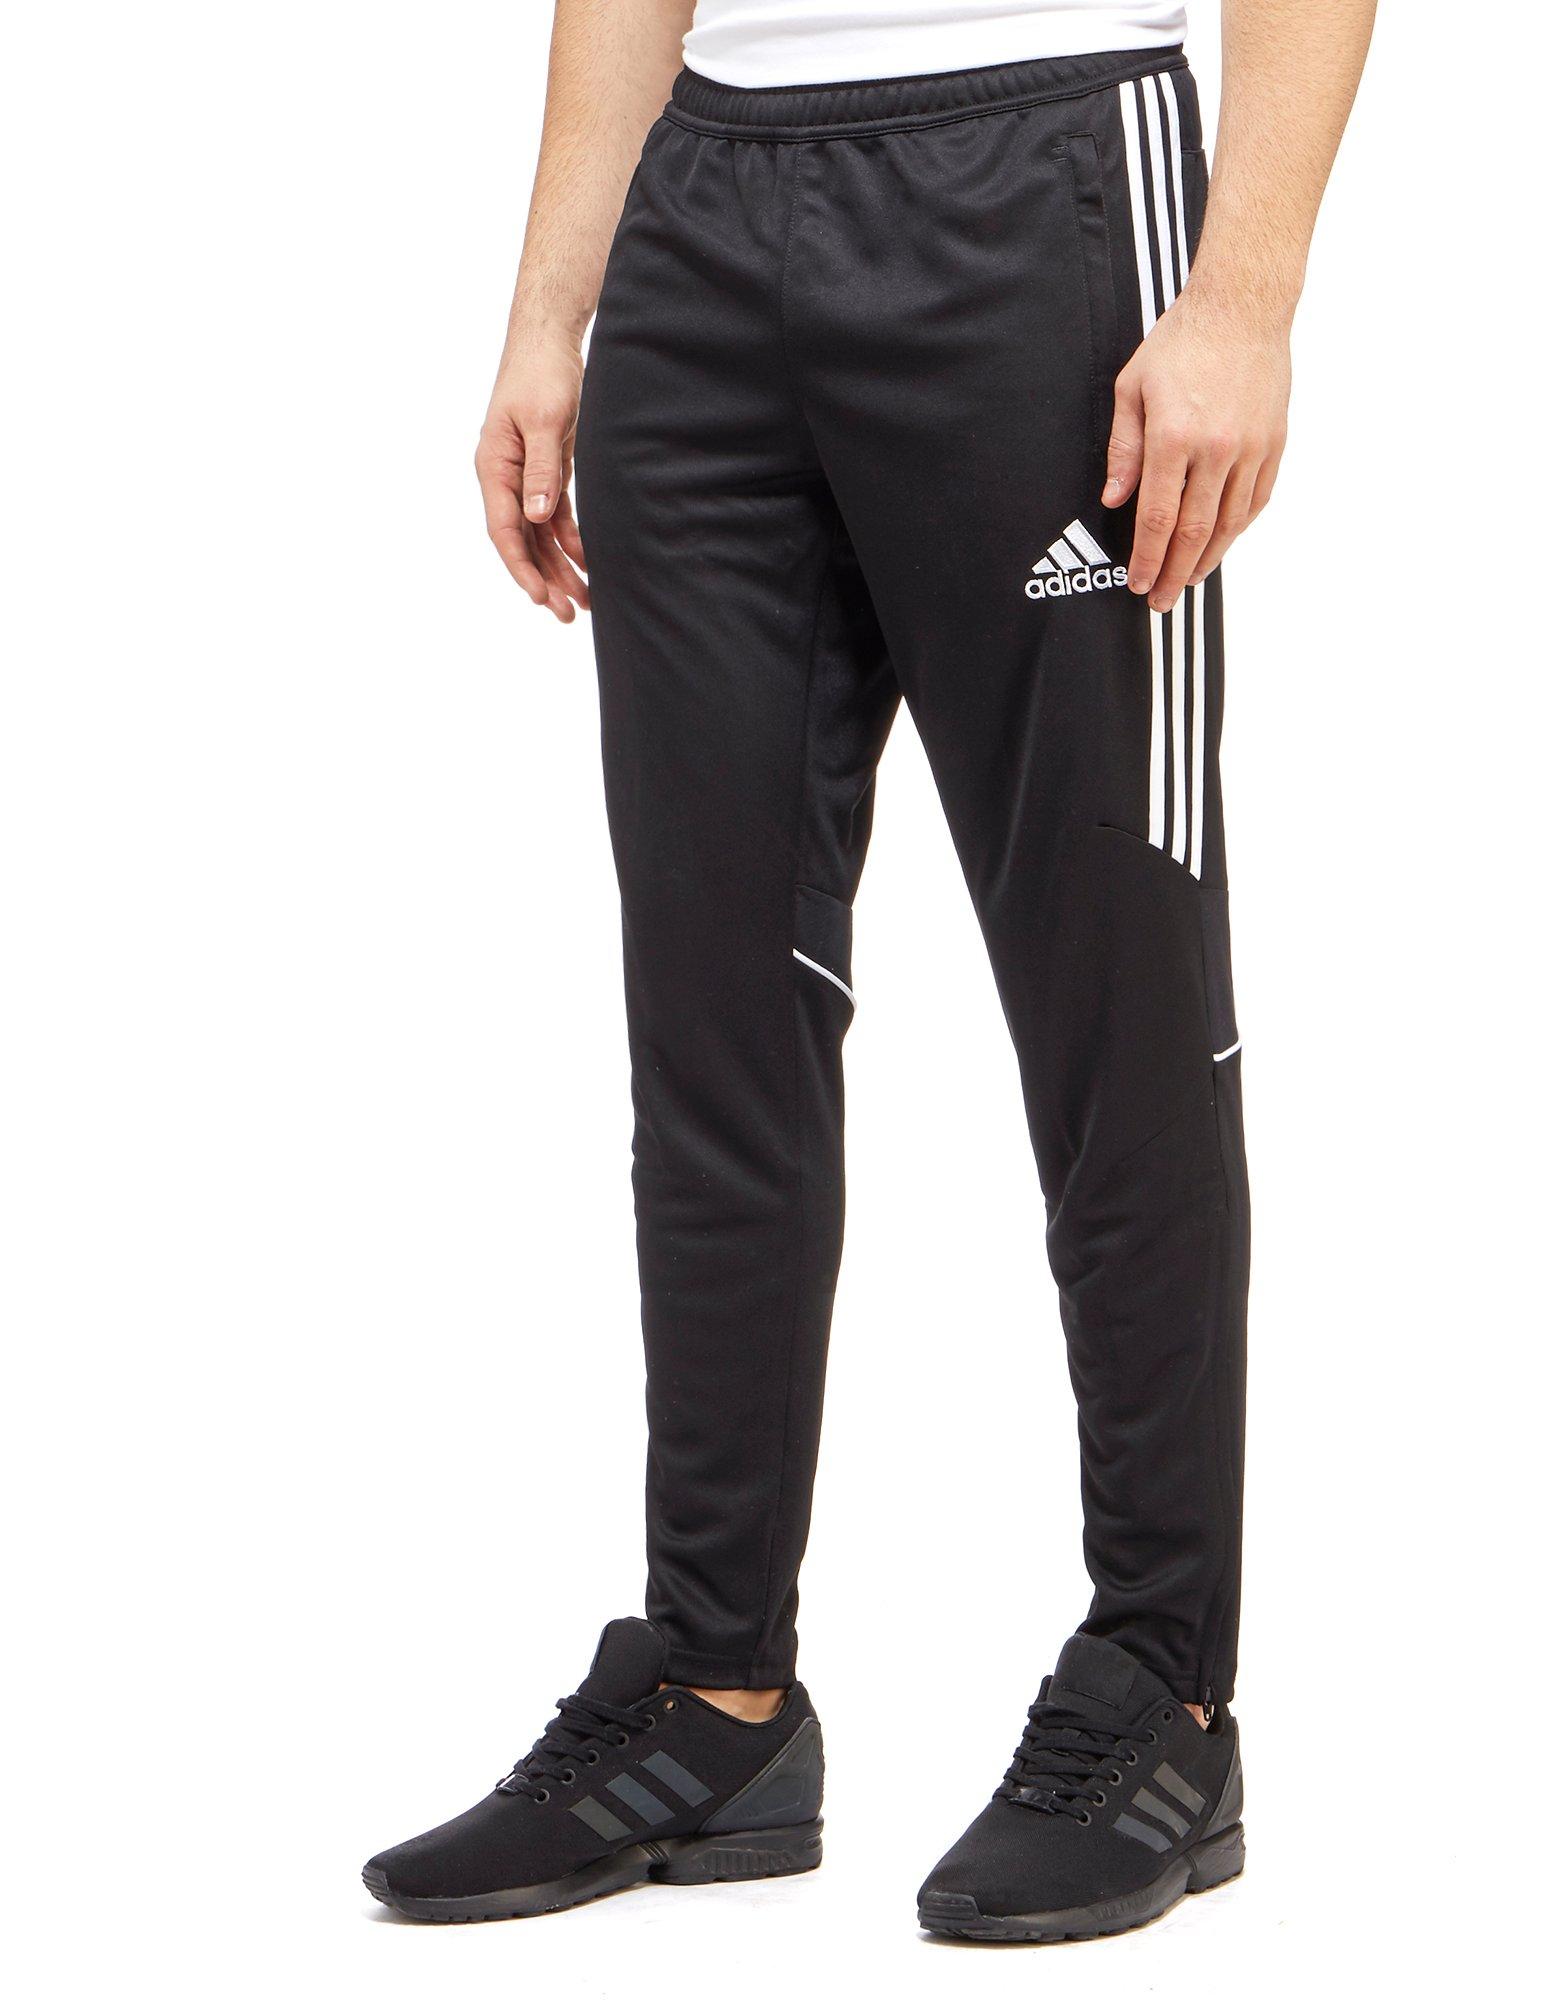 Adidas tracksuit bottoms – perfect sports inspired apparels!